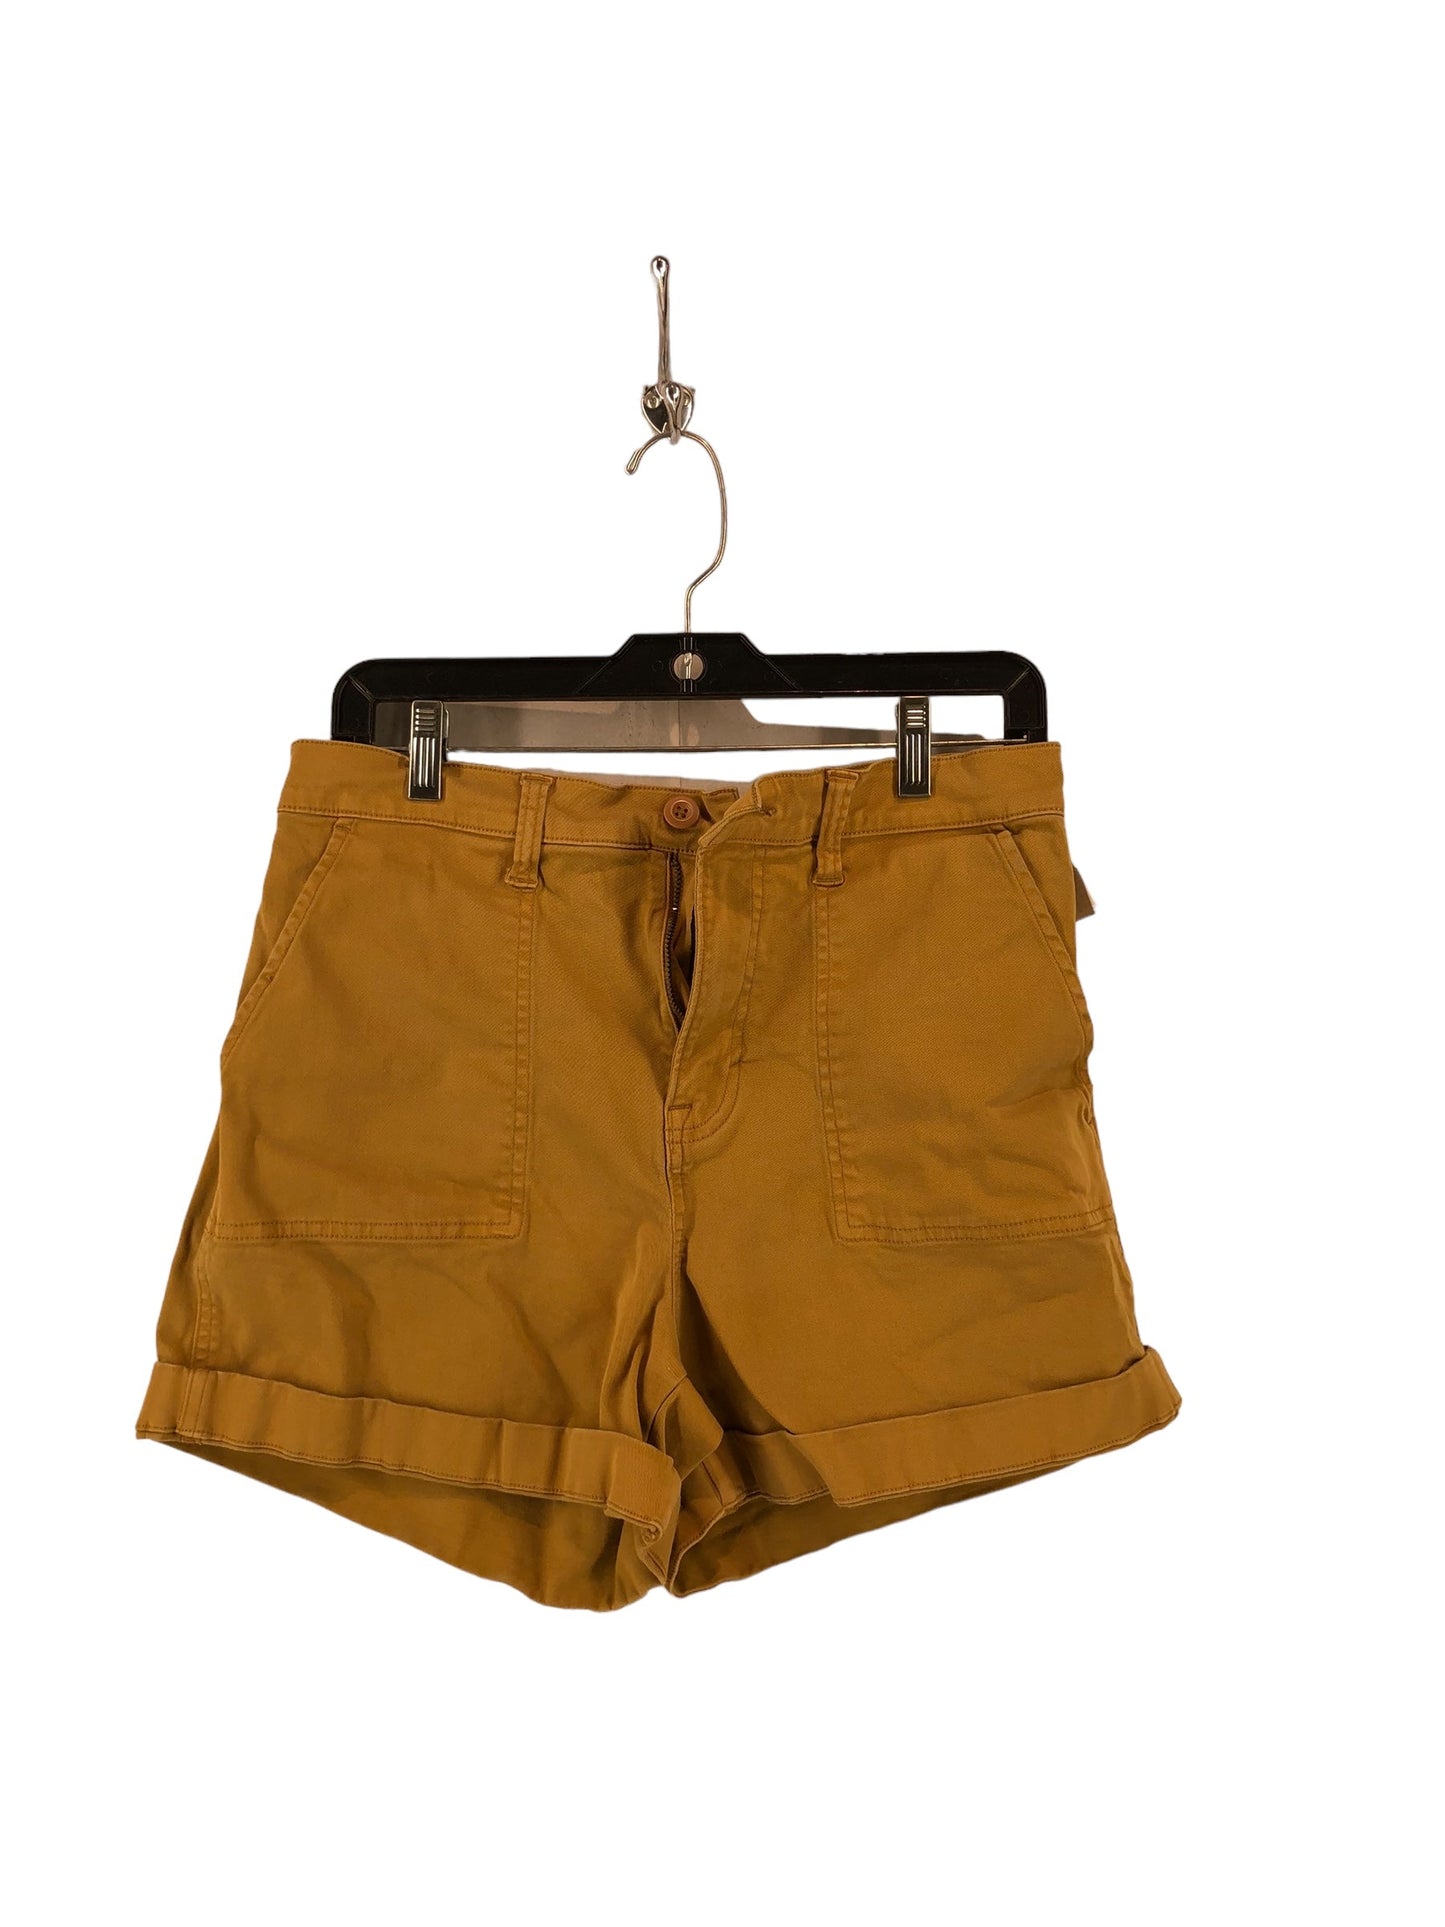 Brown Shorts Lucky Brand, Size 8